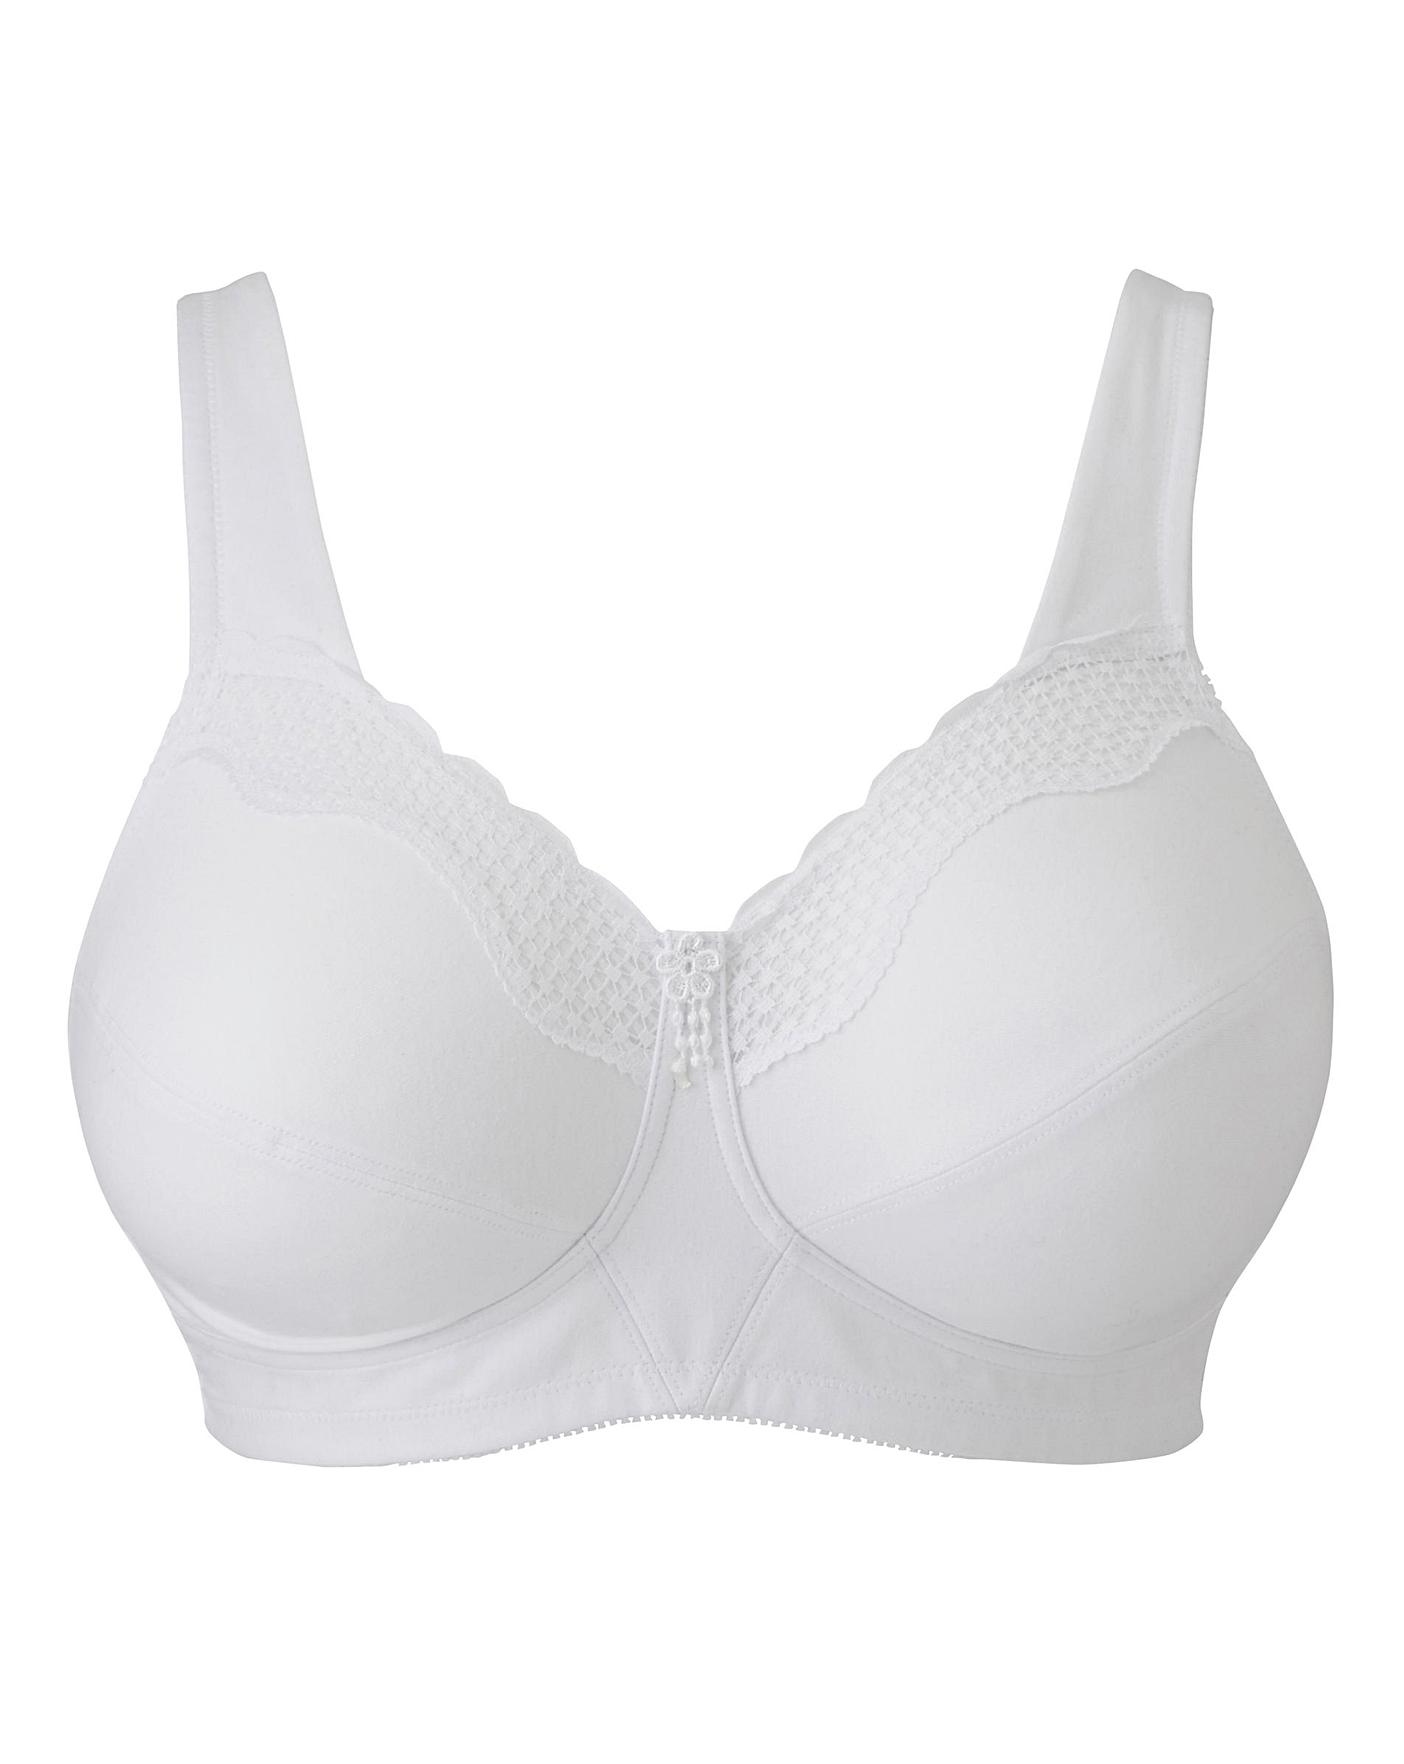 Buy ANGELFORM Women's Cotton Non Padded Non-Wired Bra  (8904205512103_White_38) at